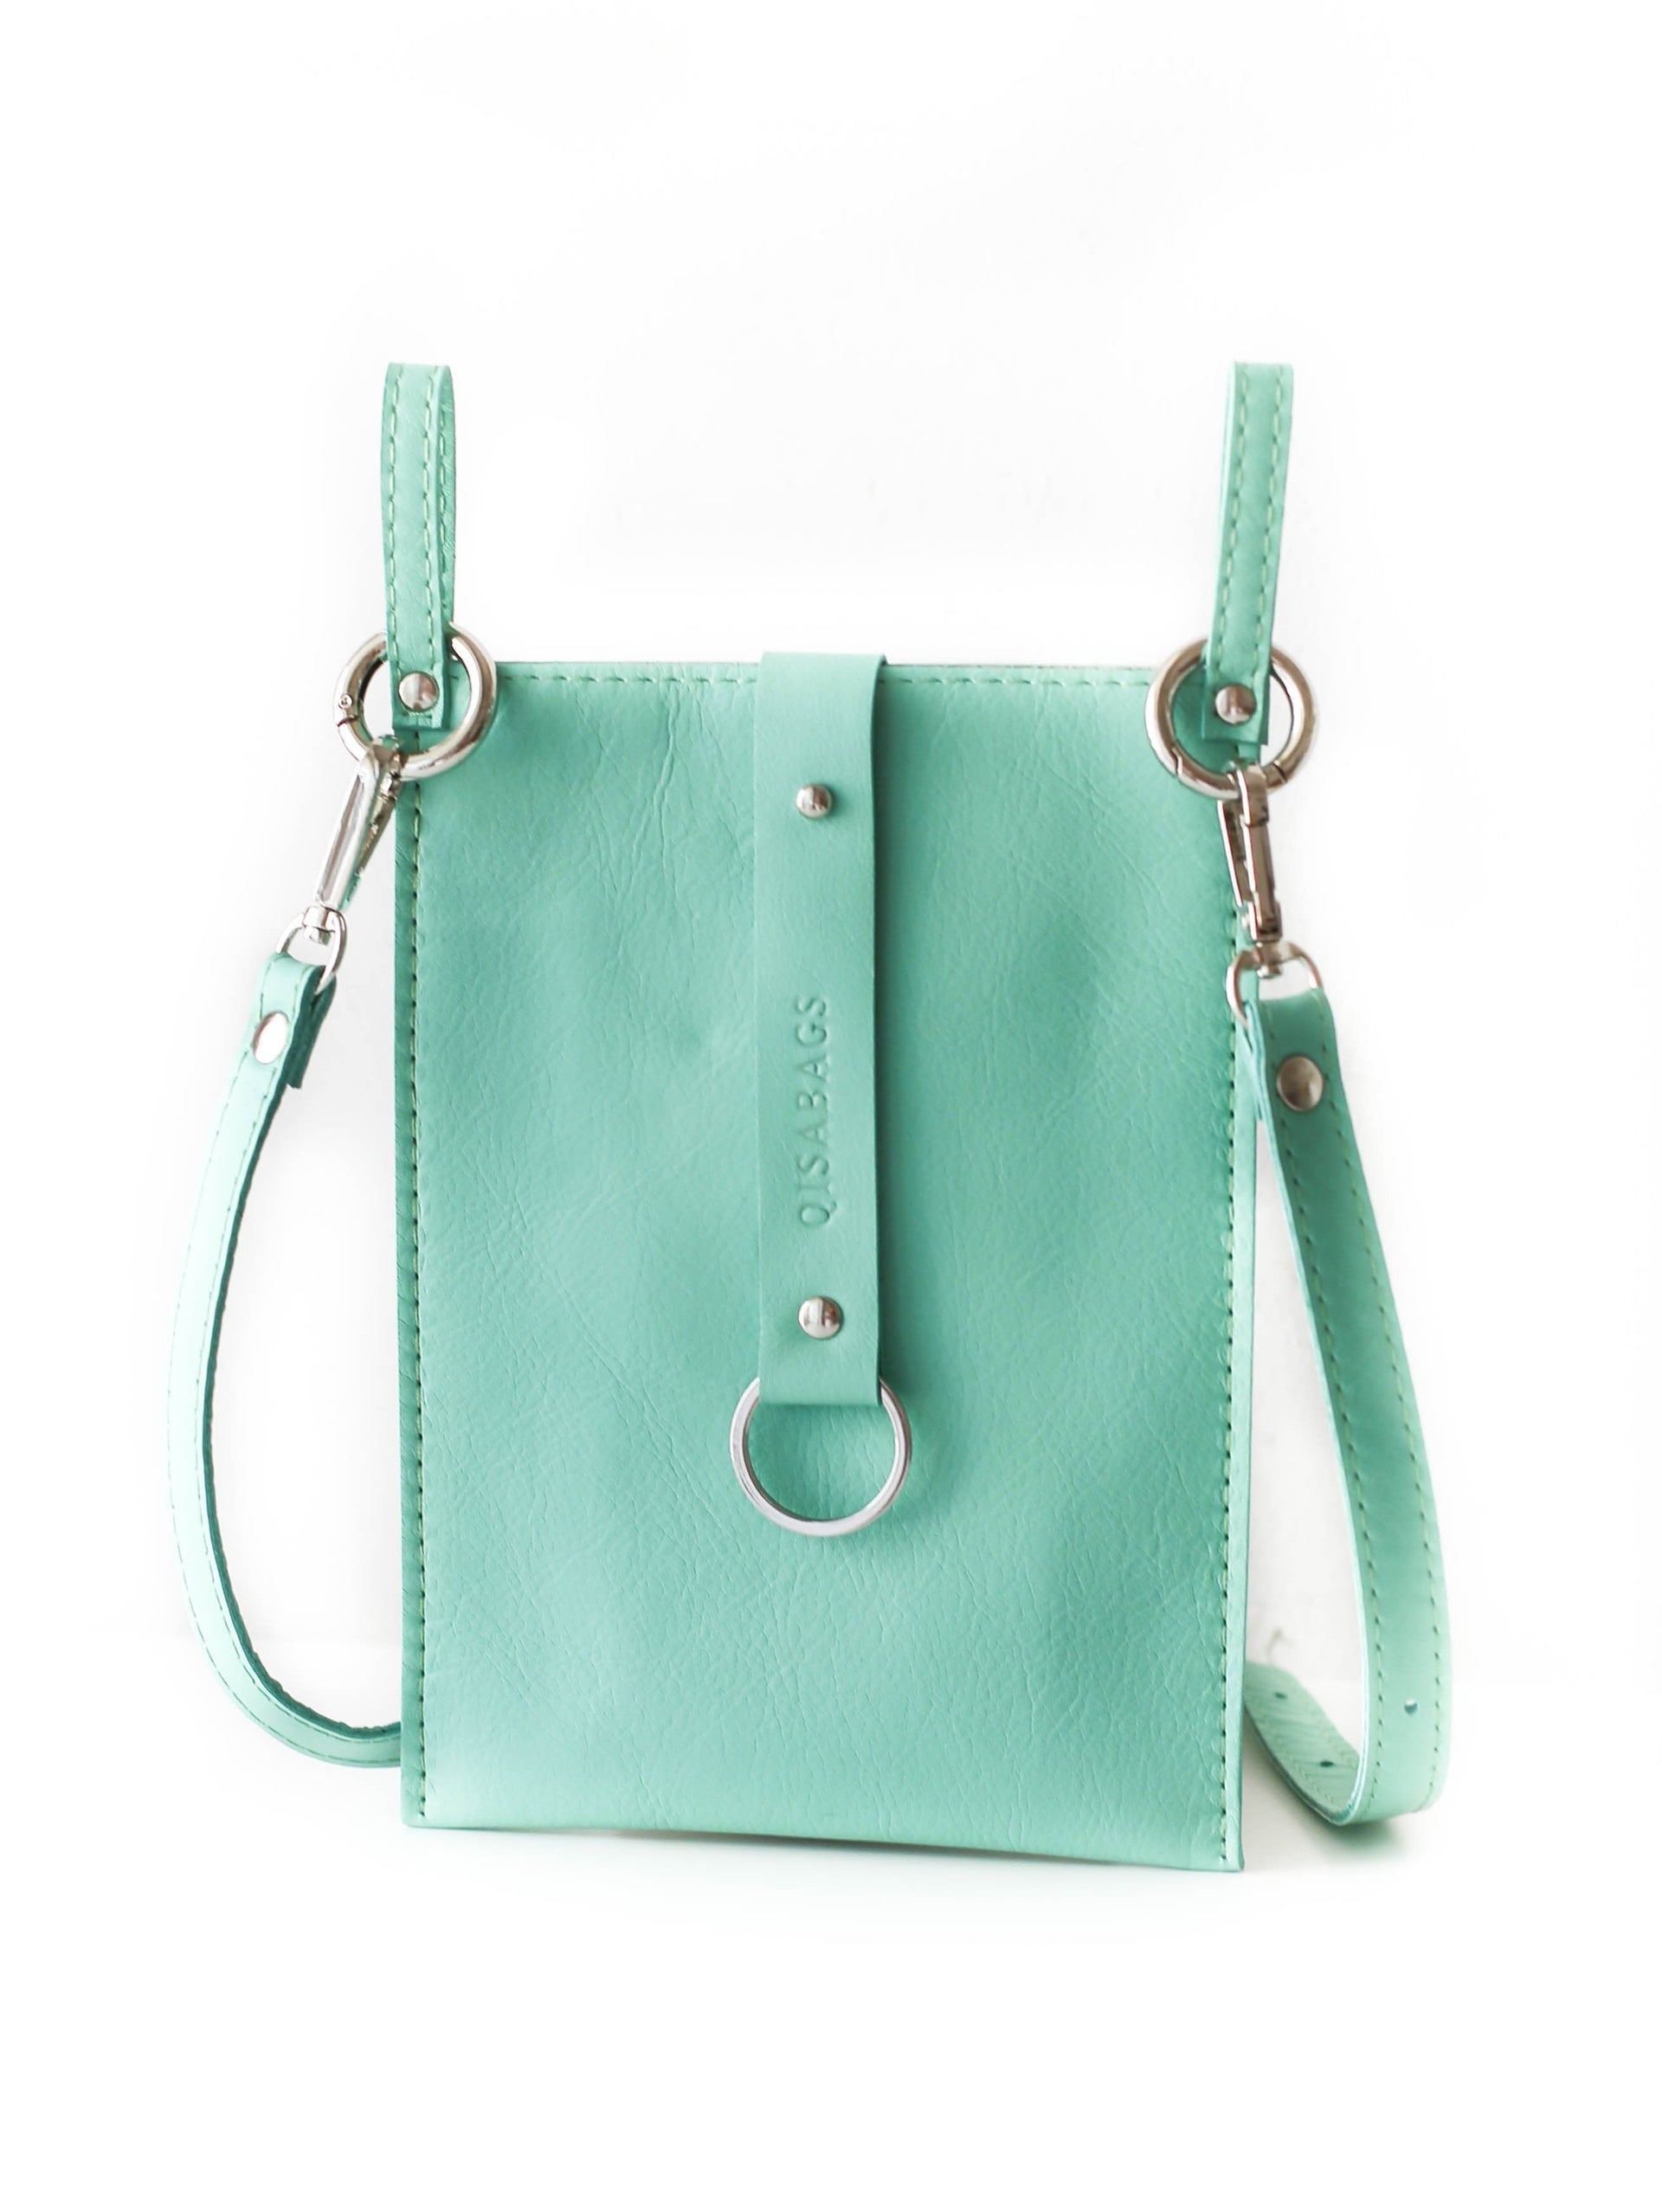 Crossbody Phone Bag | Leather Goods Leather Strap / with A Card Holder / Silver